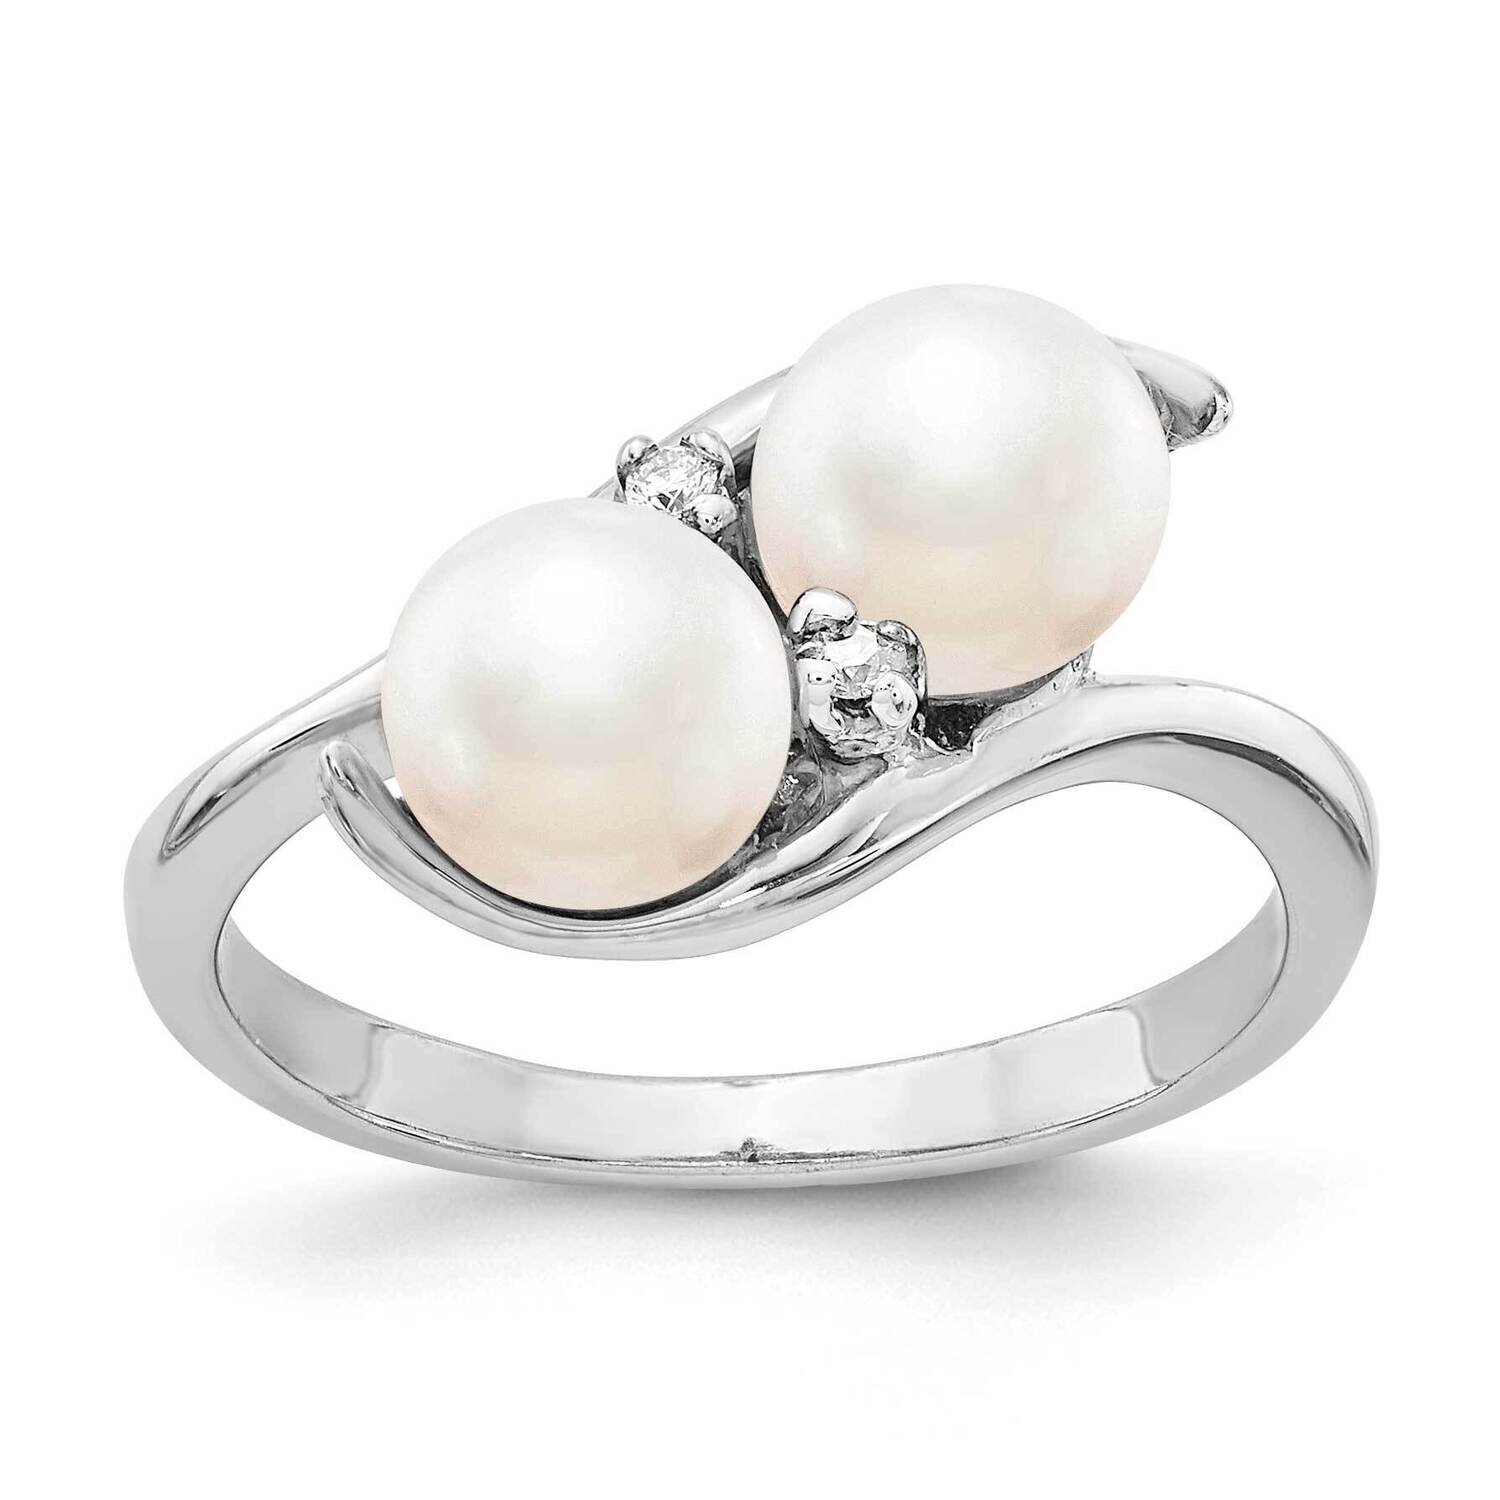 6mm Fw Cultured Pearl A Diamond Ring 14k White Gold Y4367PL/A